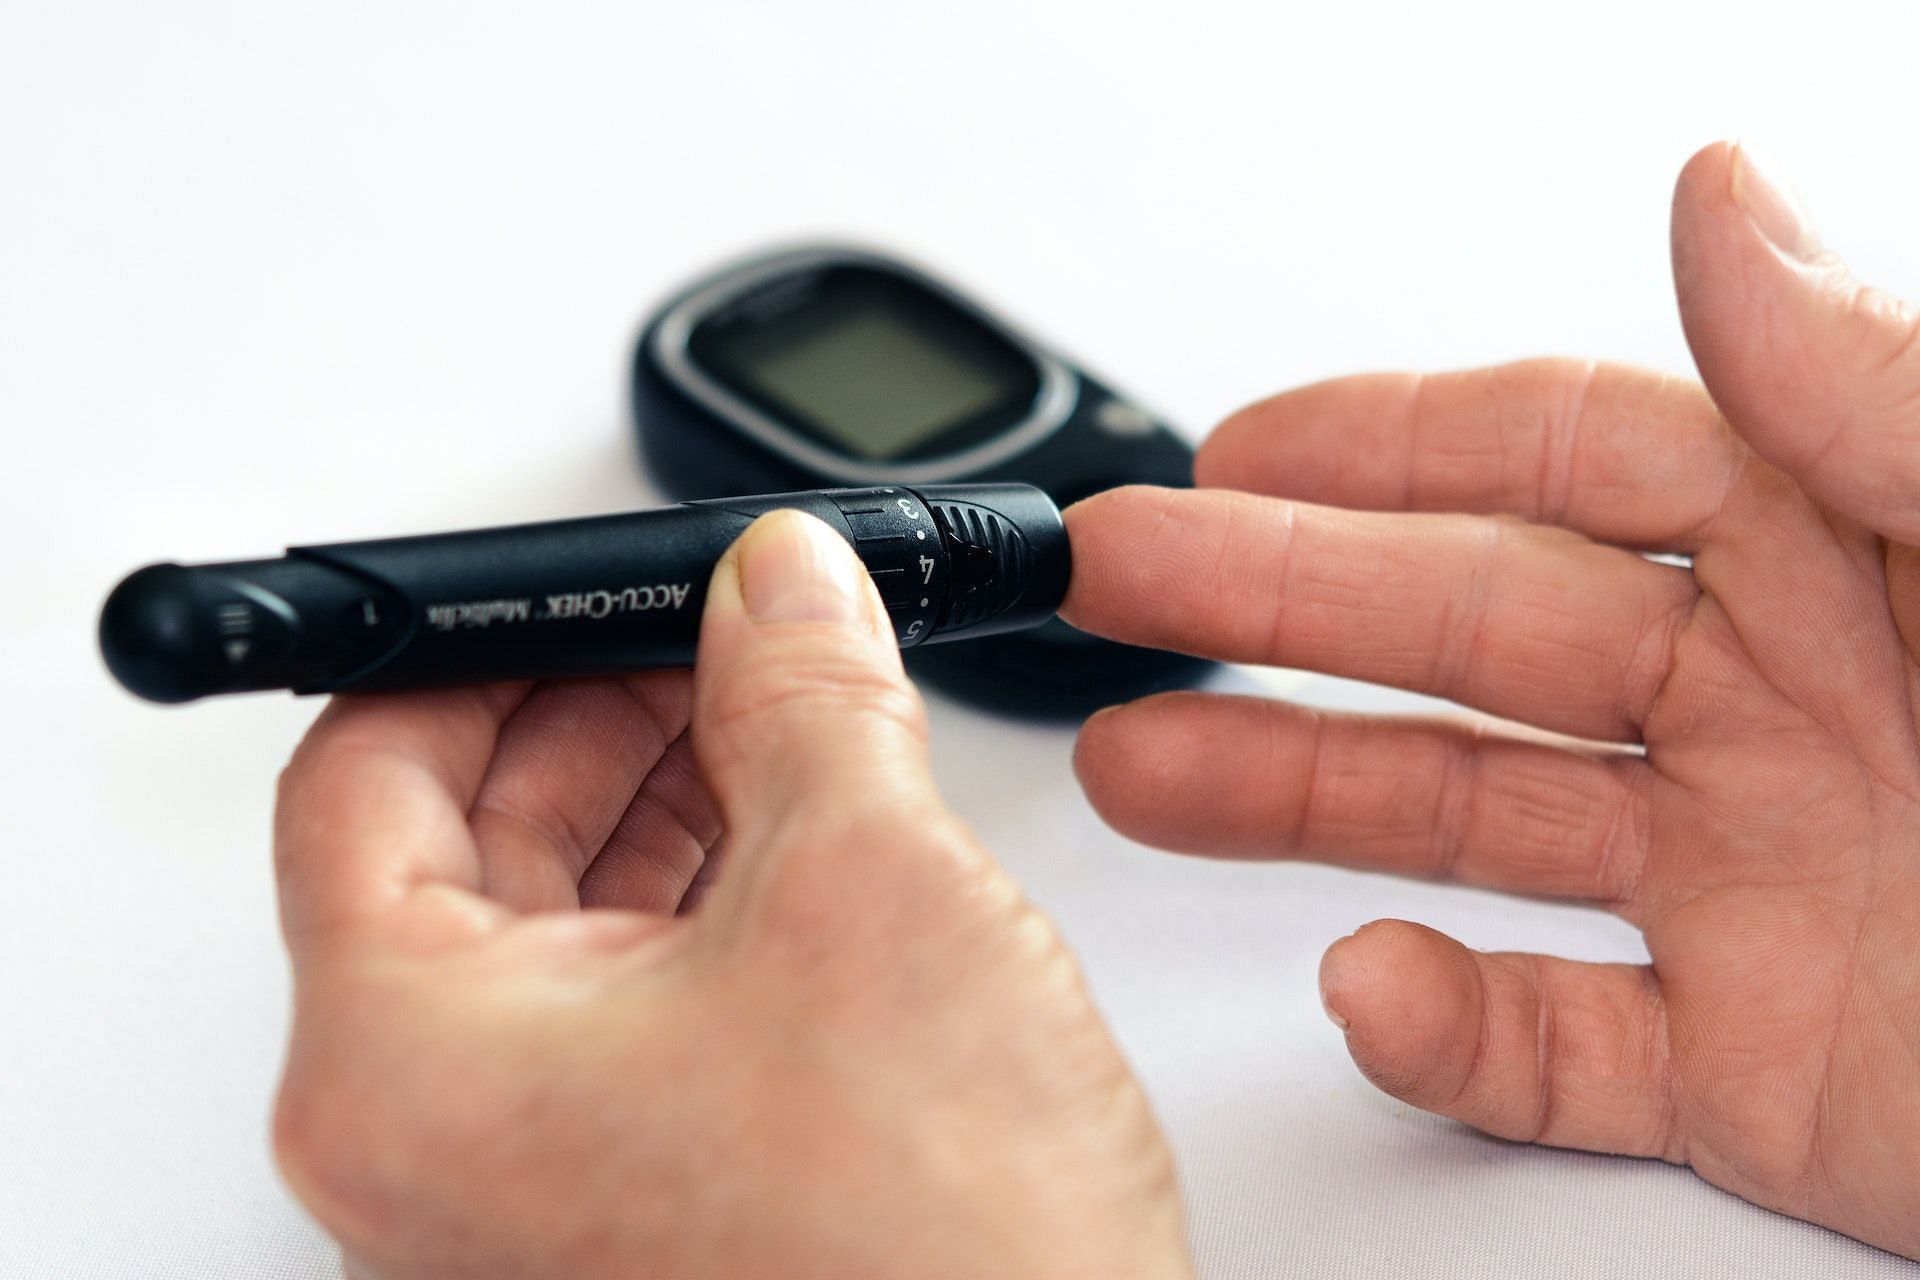 Diabetes can increase risk of stomach paralysis. (Photo via Pexels/PhotoMIX Company)